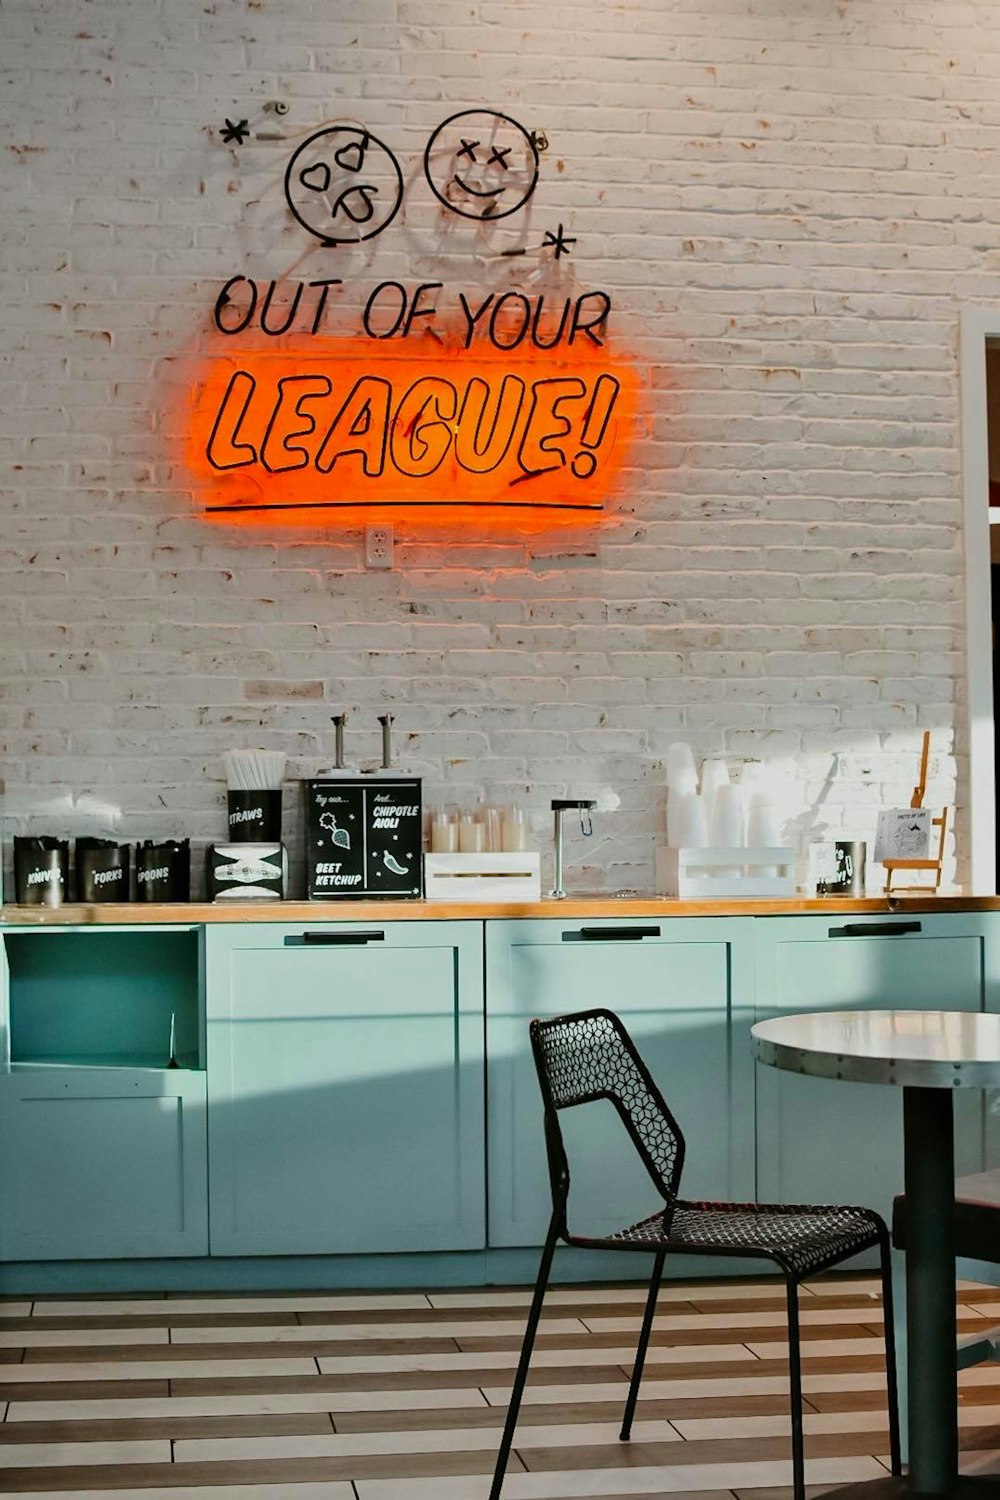 Out of Your League neon light signage